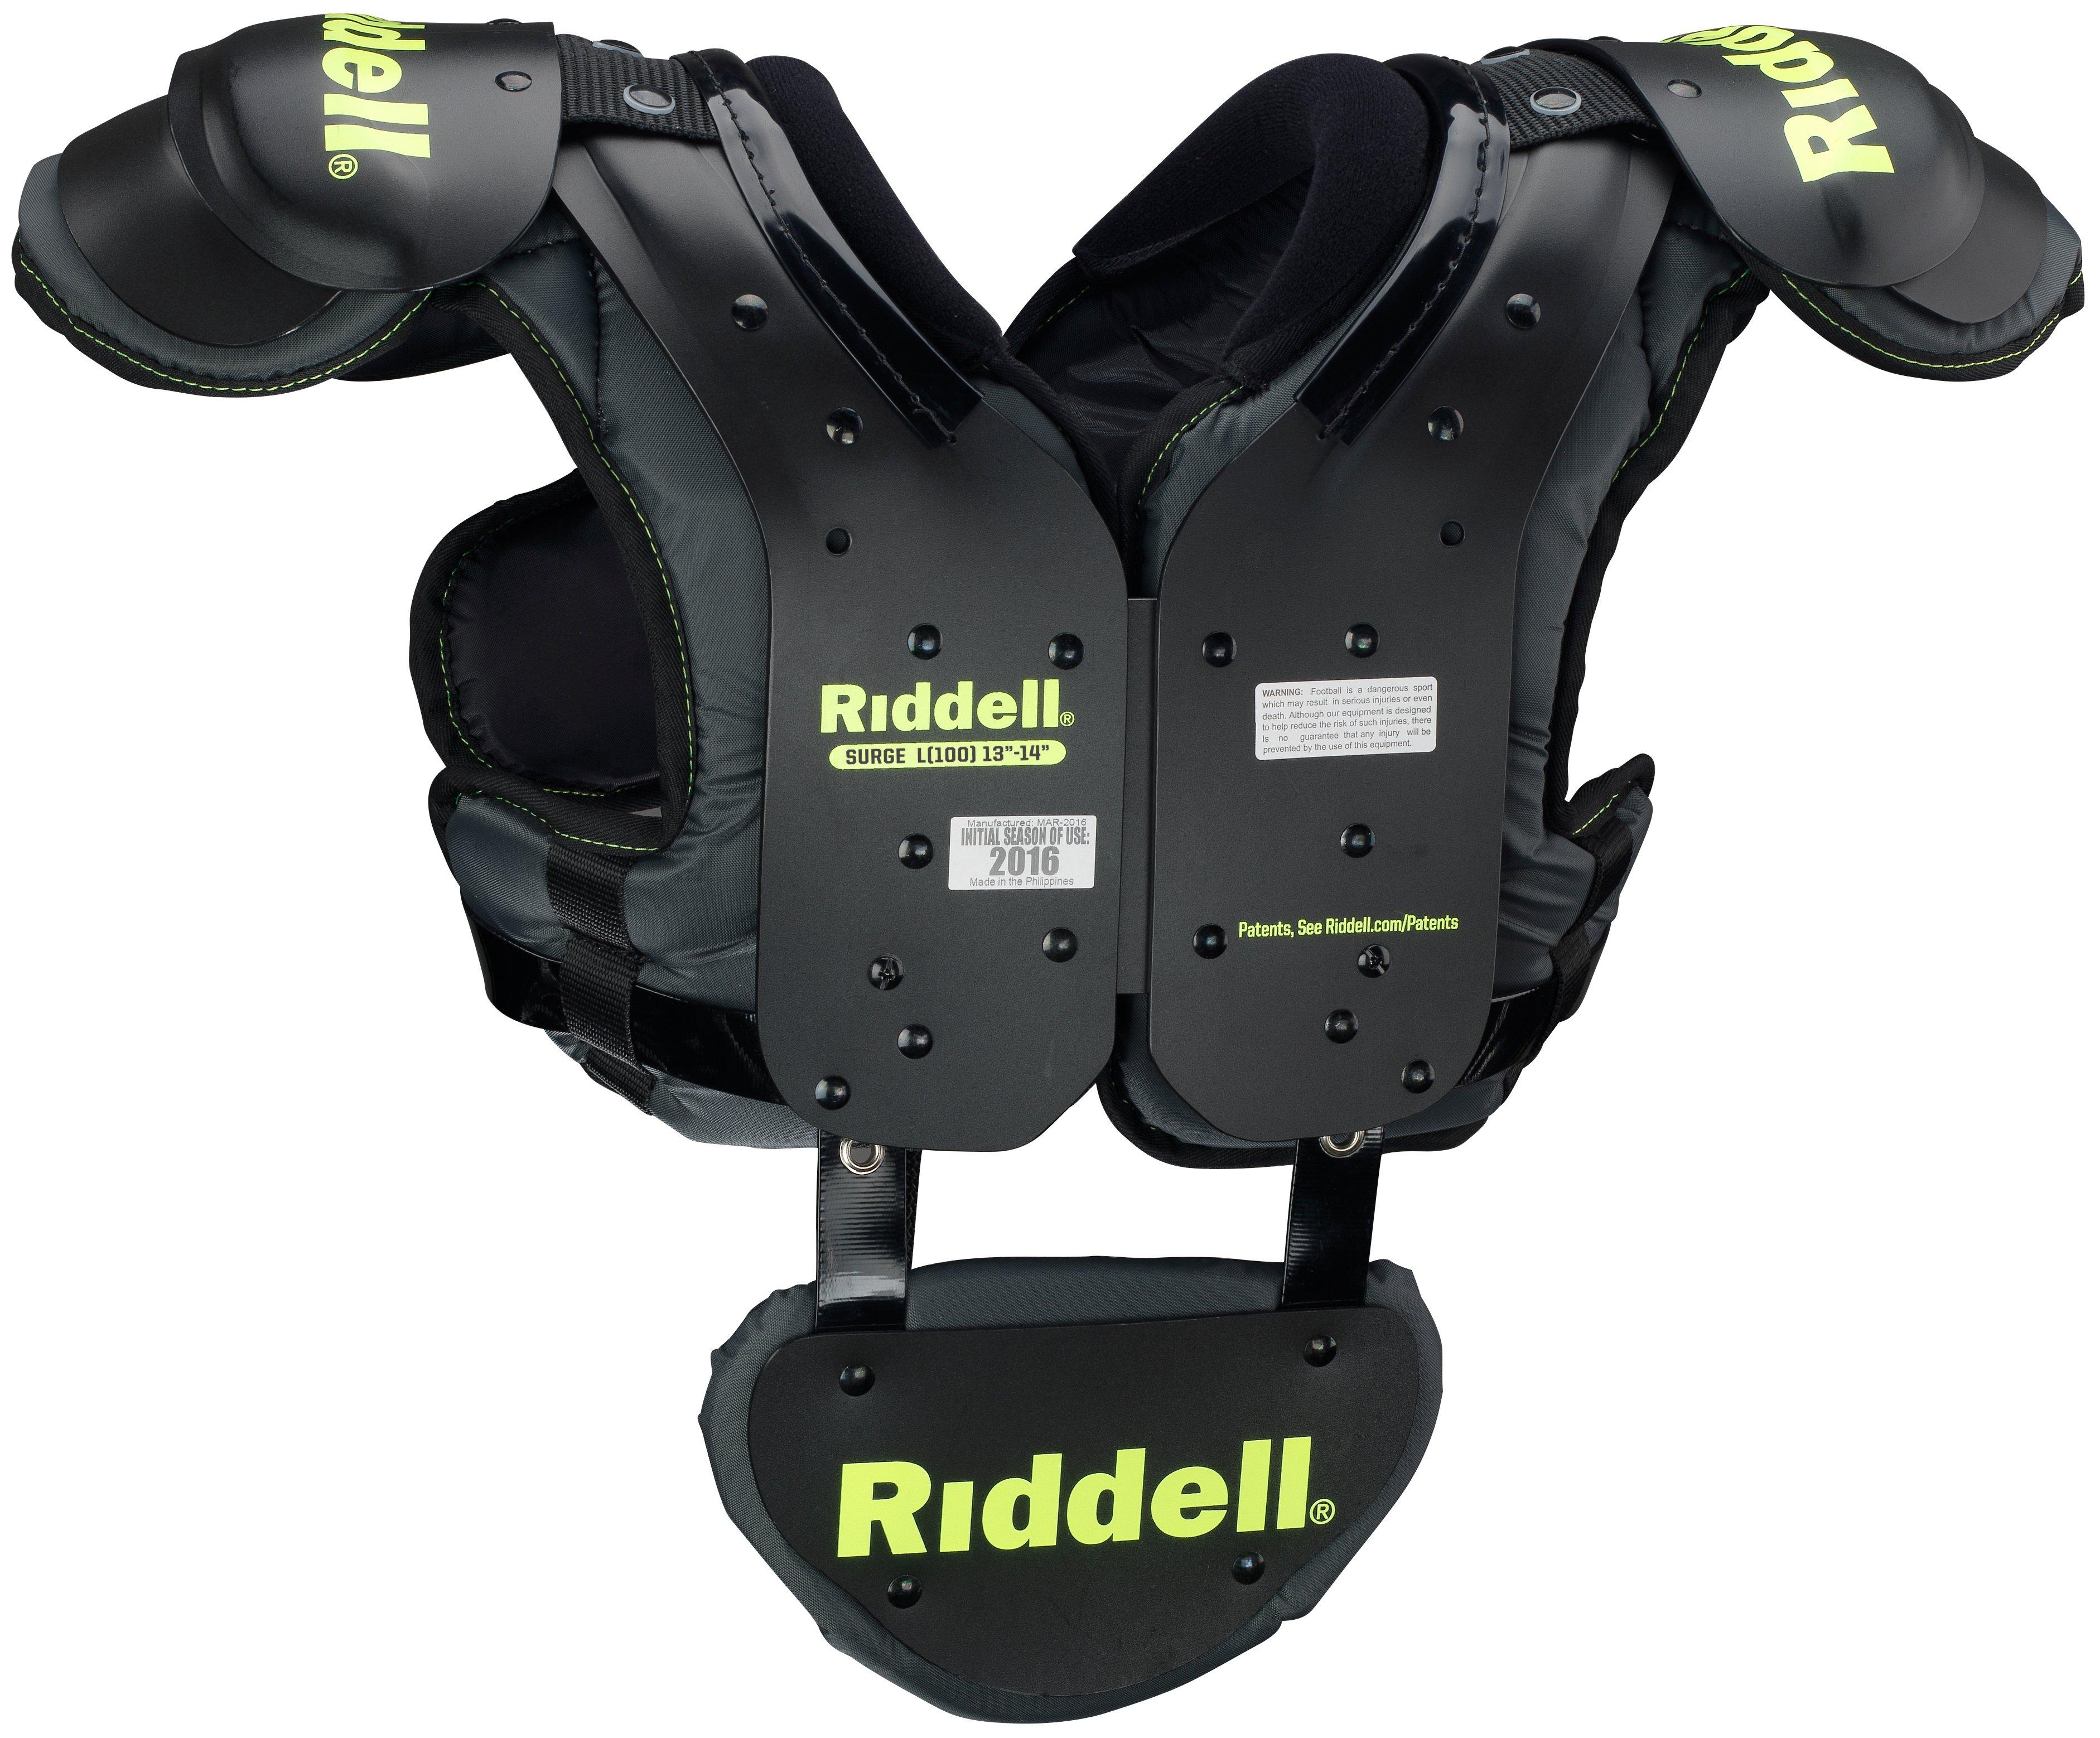 Riddell Surge Youth Shoulder Pad w/Backplate, Black/Neon Green, Size: XL